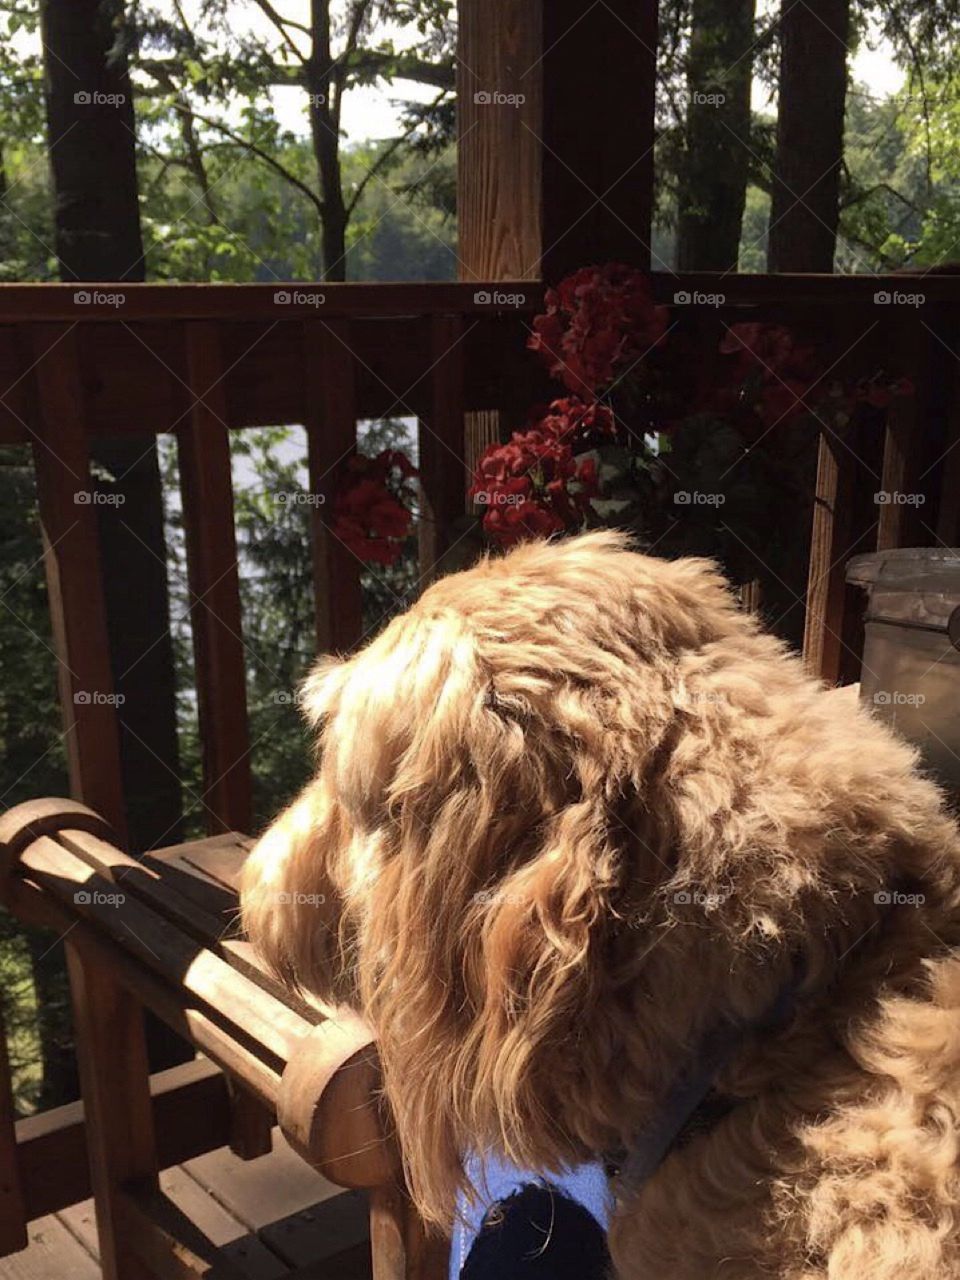 This is my best friends dog. We were sitting outside on the porch while he protected his land from other animals like squirrels. They have a beautiful atmosphere at their lake house, with tons of privacy and nature. It’s the best!